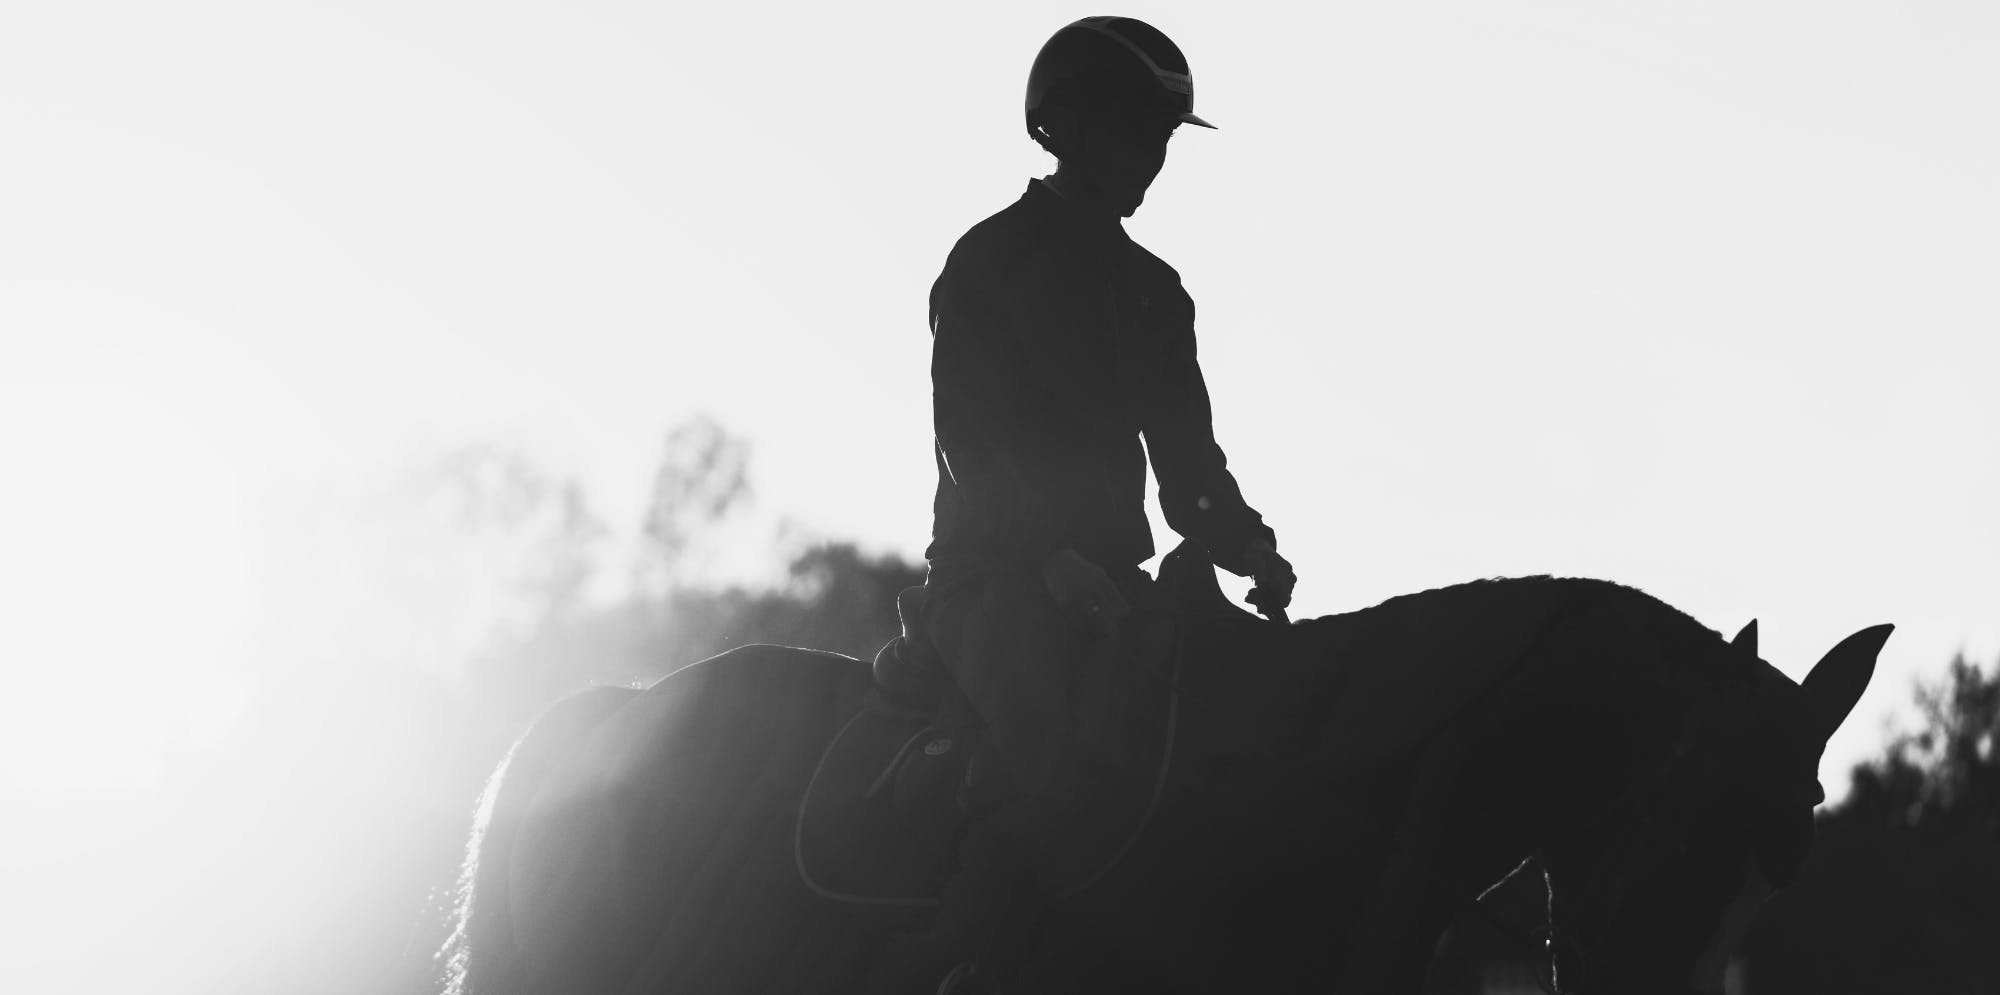 Equestrian Tips - Technical guide